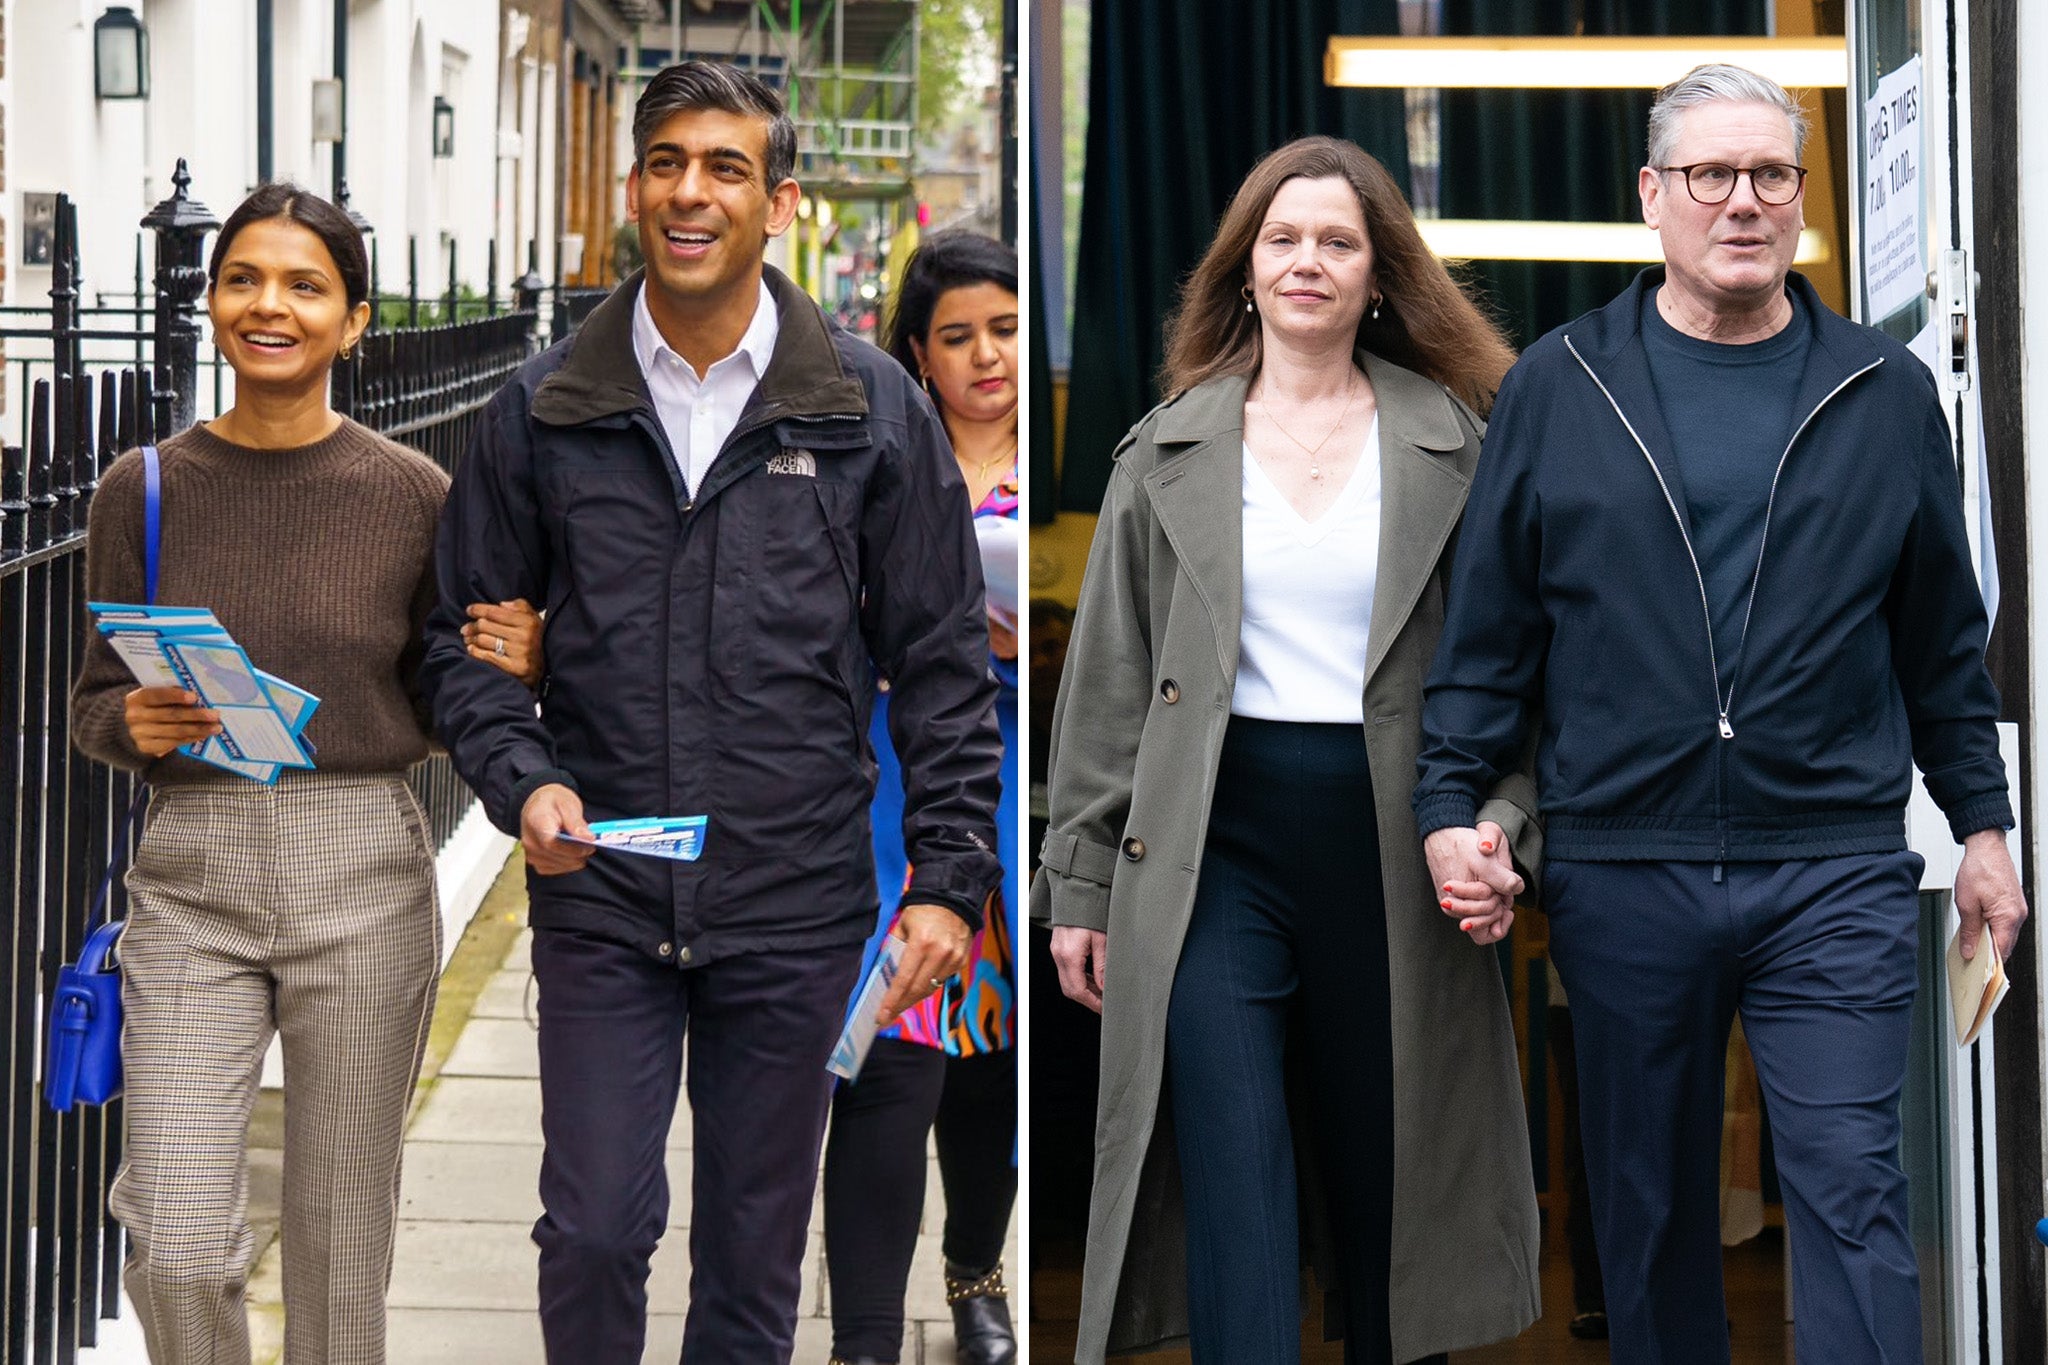 Rishi Sunak, Akshata Murty and the Starmers pictured on the day of May’s local elections